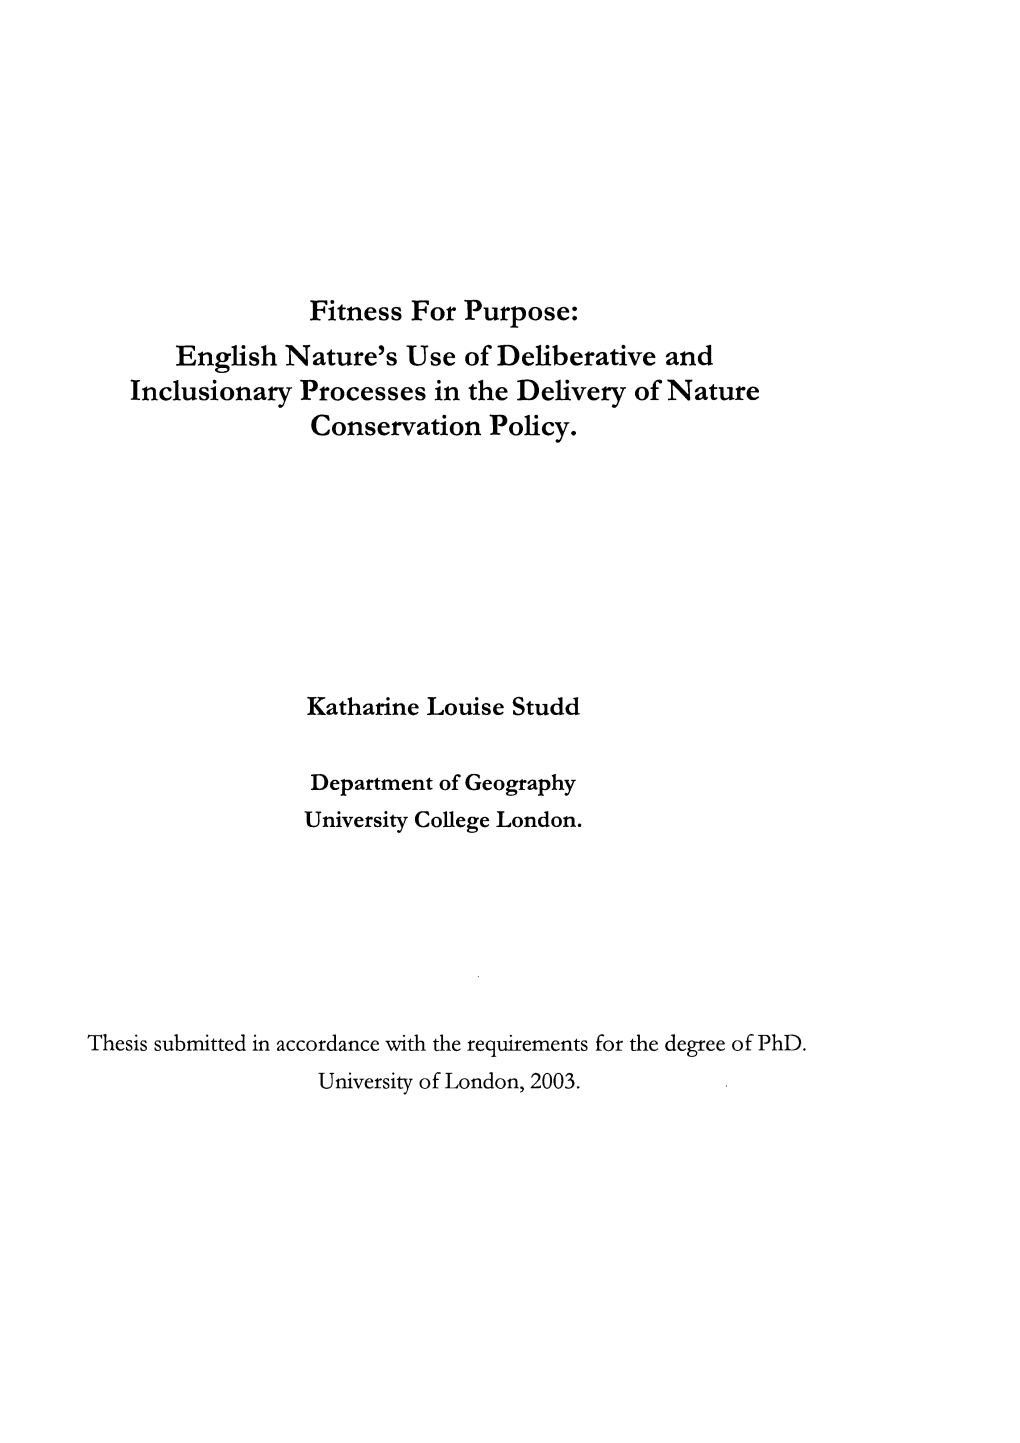 Fitness for Purpose: English Nature's Use of Deliberative And